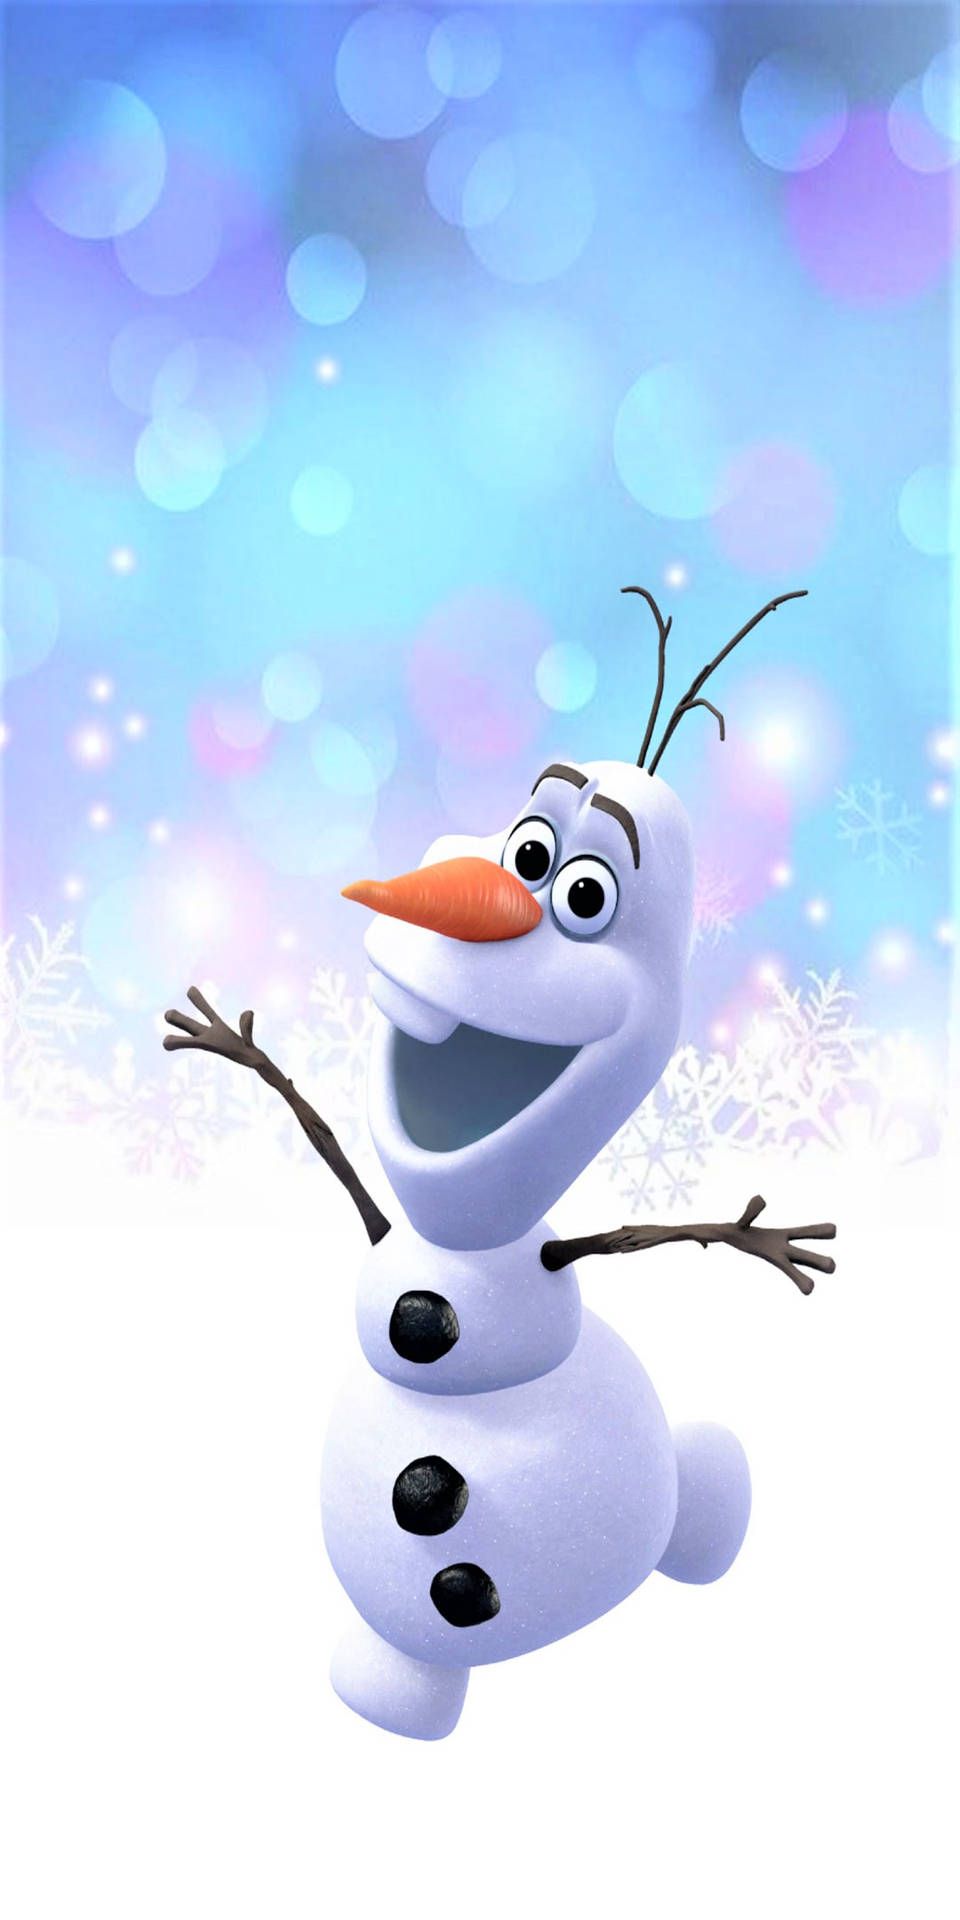 Download Olaf The Enchanted Snowman Wallpaper